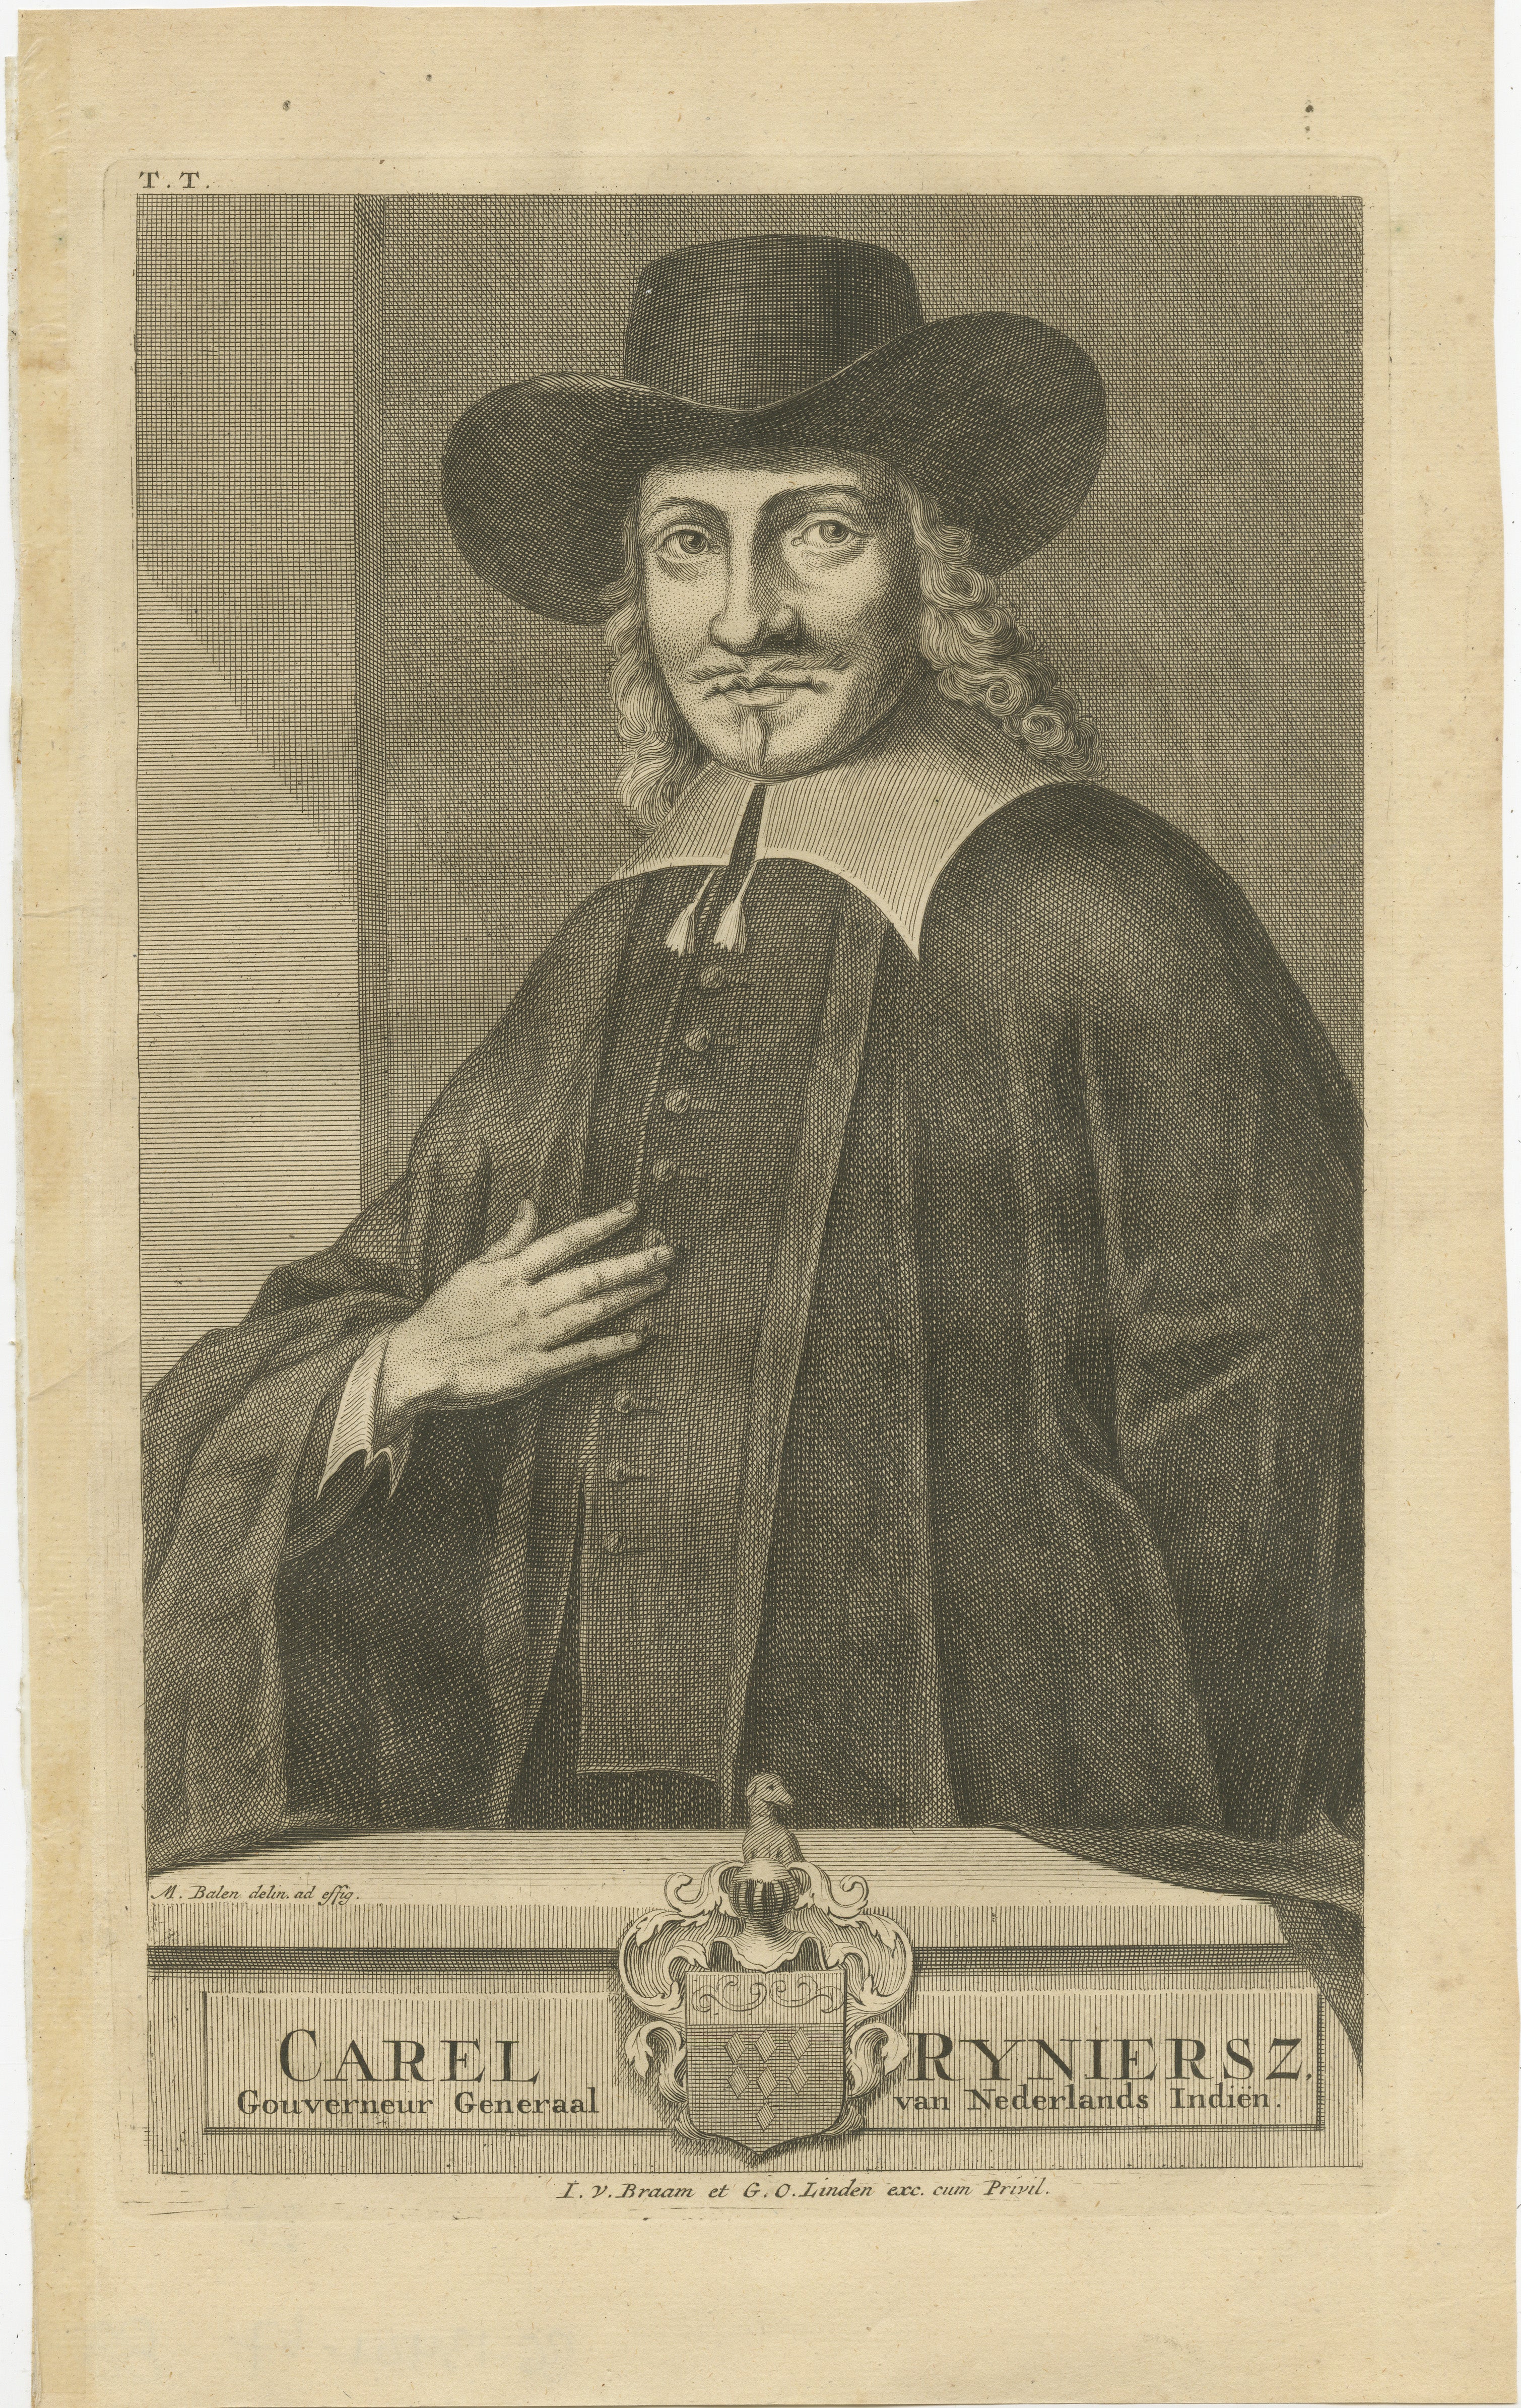 Carel Reyniersz (often spelled Carel Reyniersz) served as the Governor-General of the Dutch East India Company (VOC) in the Dutch East Indies, but his term was from 1650 to 1653, not 1724. Here's a summary of what is known about him:

1. **Early